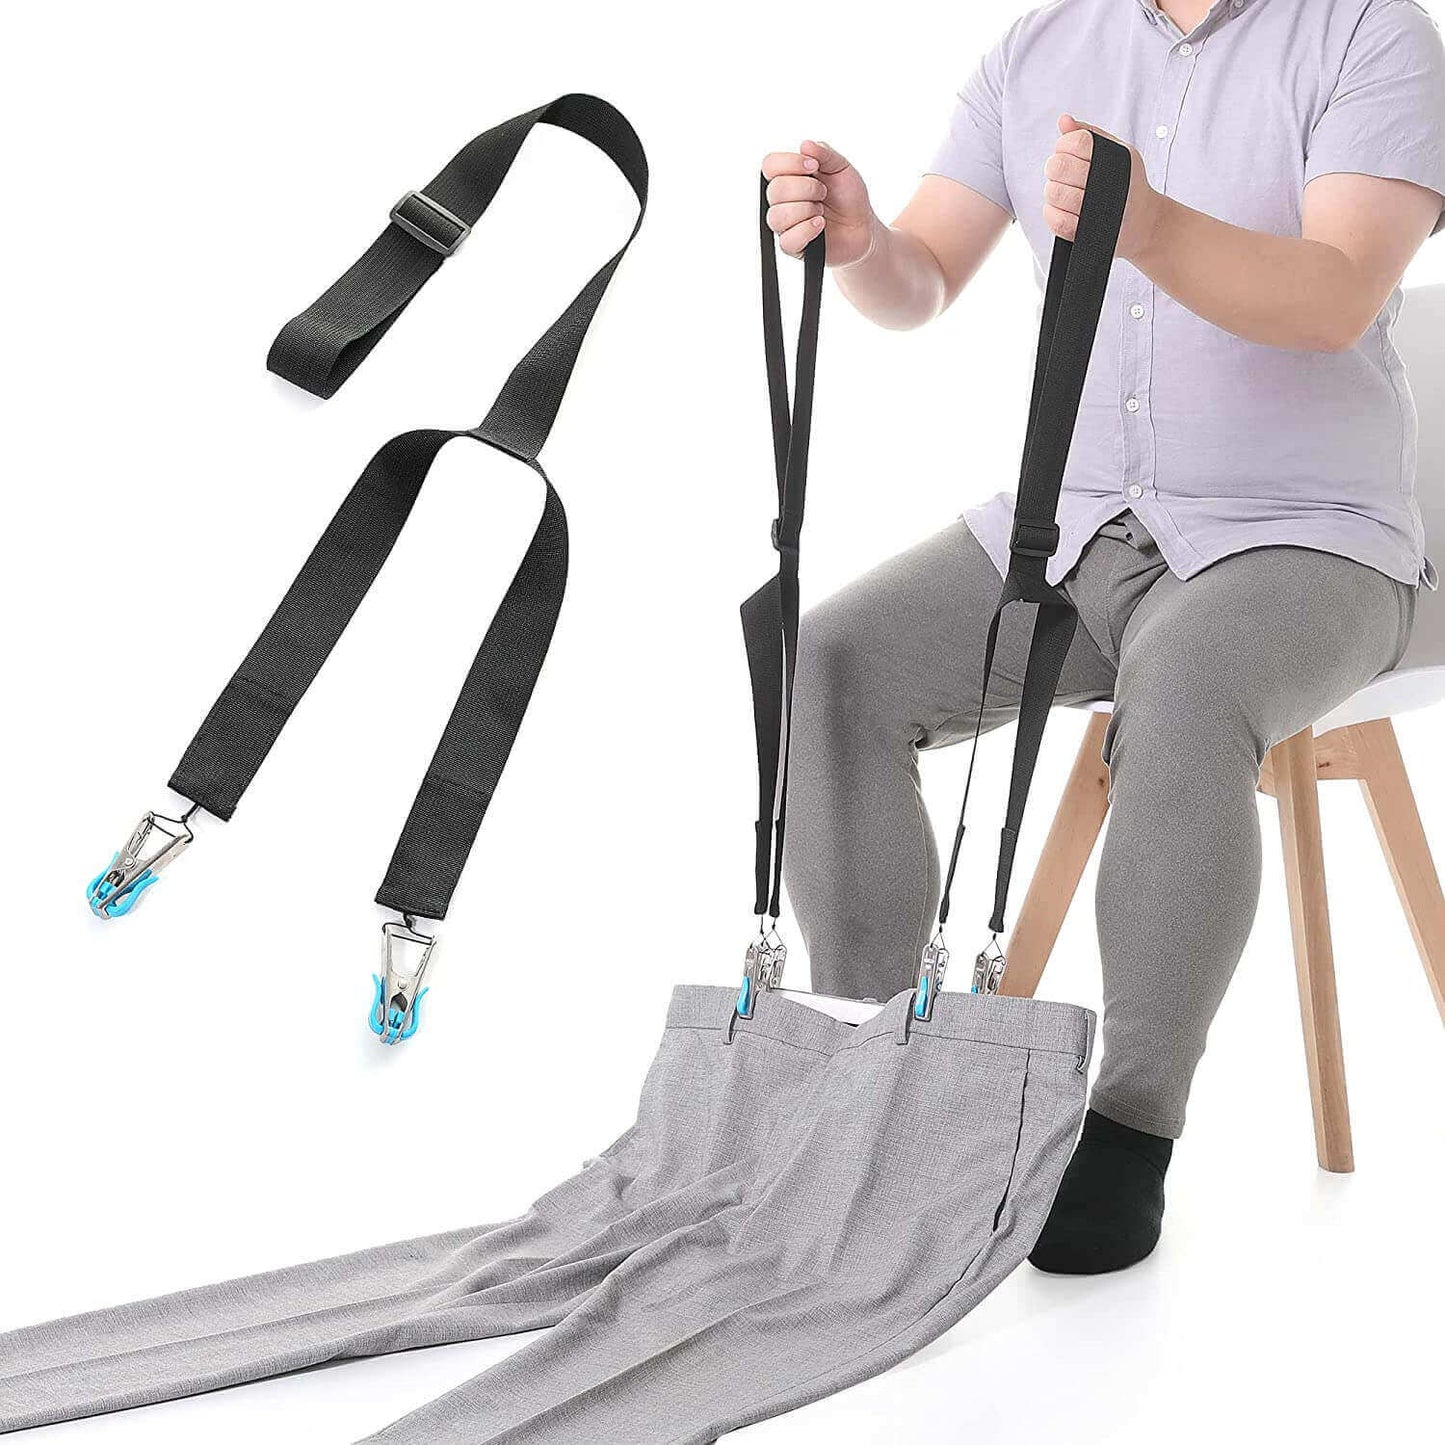 cip and pull dressing aid for pants, the user is pulling up the pants